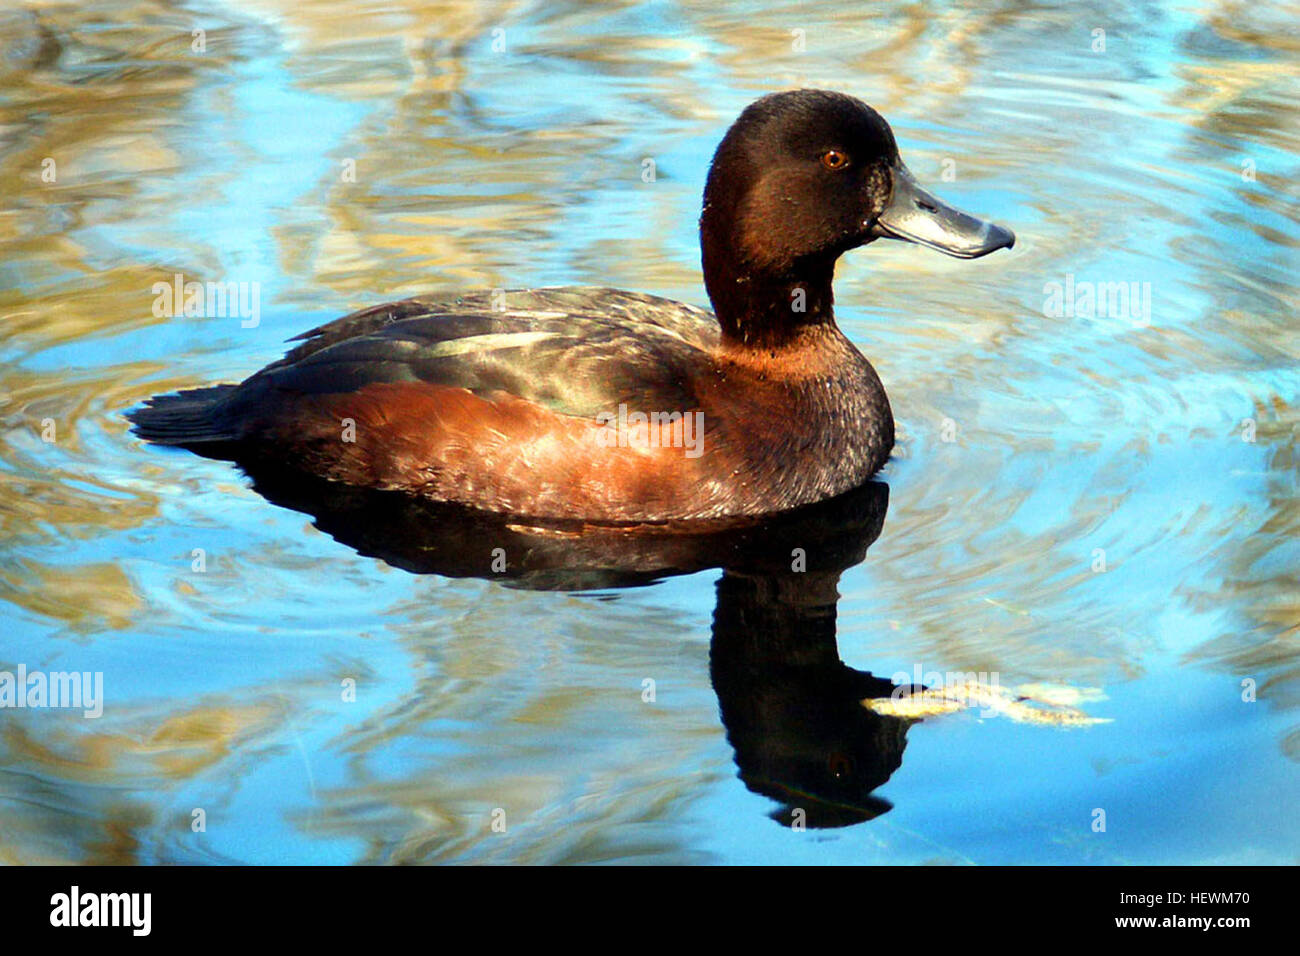 The New Zealand scaup or pāpango is a short, round diving duck. The male is glossy dark brown and black with yellow eyes. The female is dark brown and often has a vertical white band at the base of the bill. They tend to avoid danger by diving rather than by flying. Stock Photo